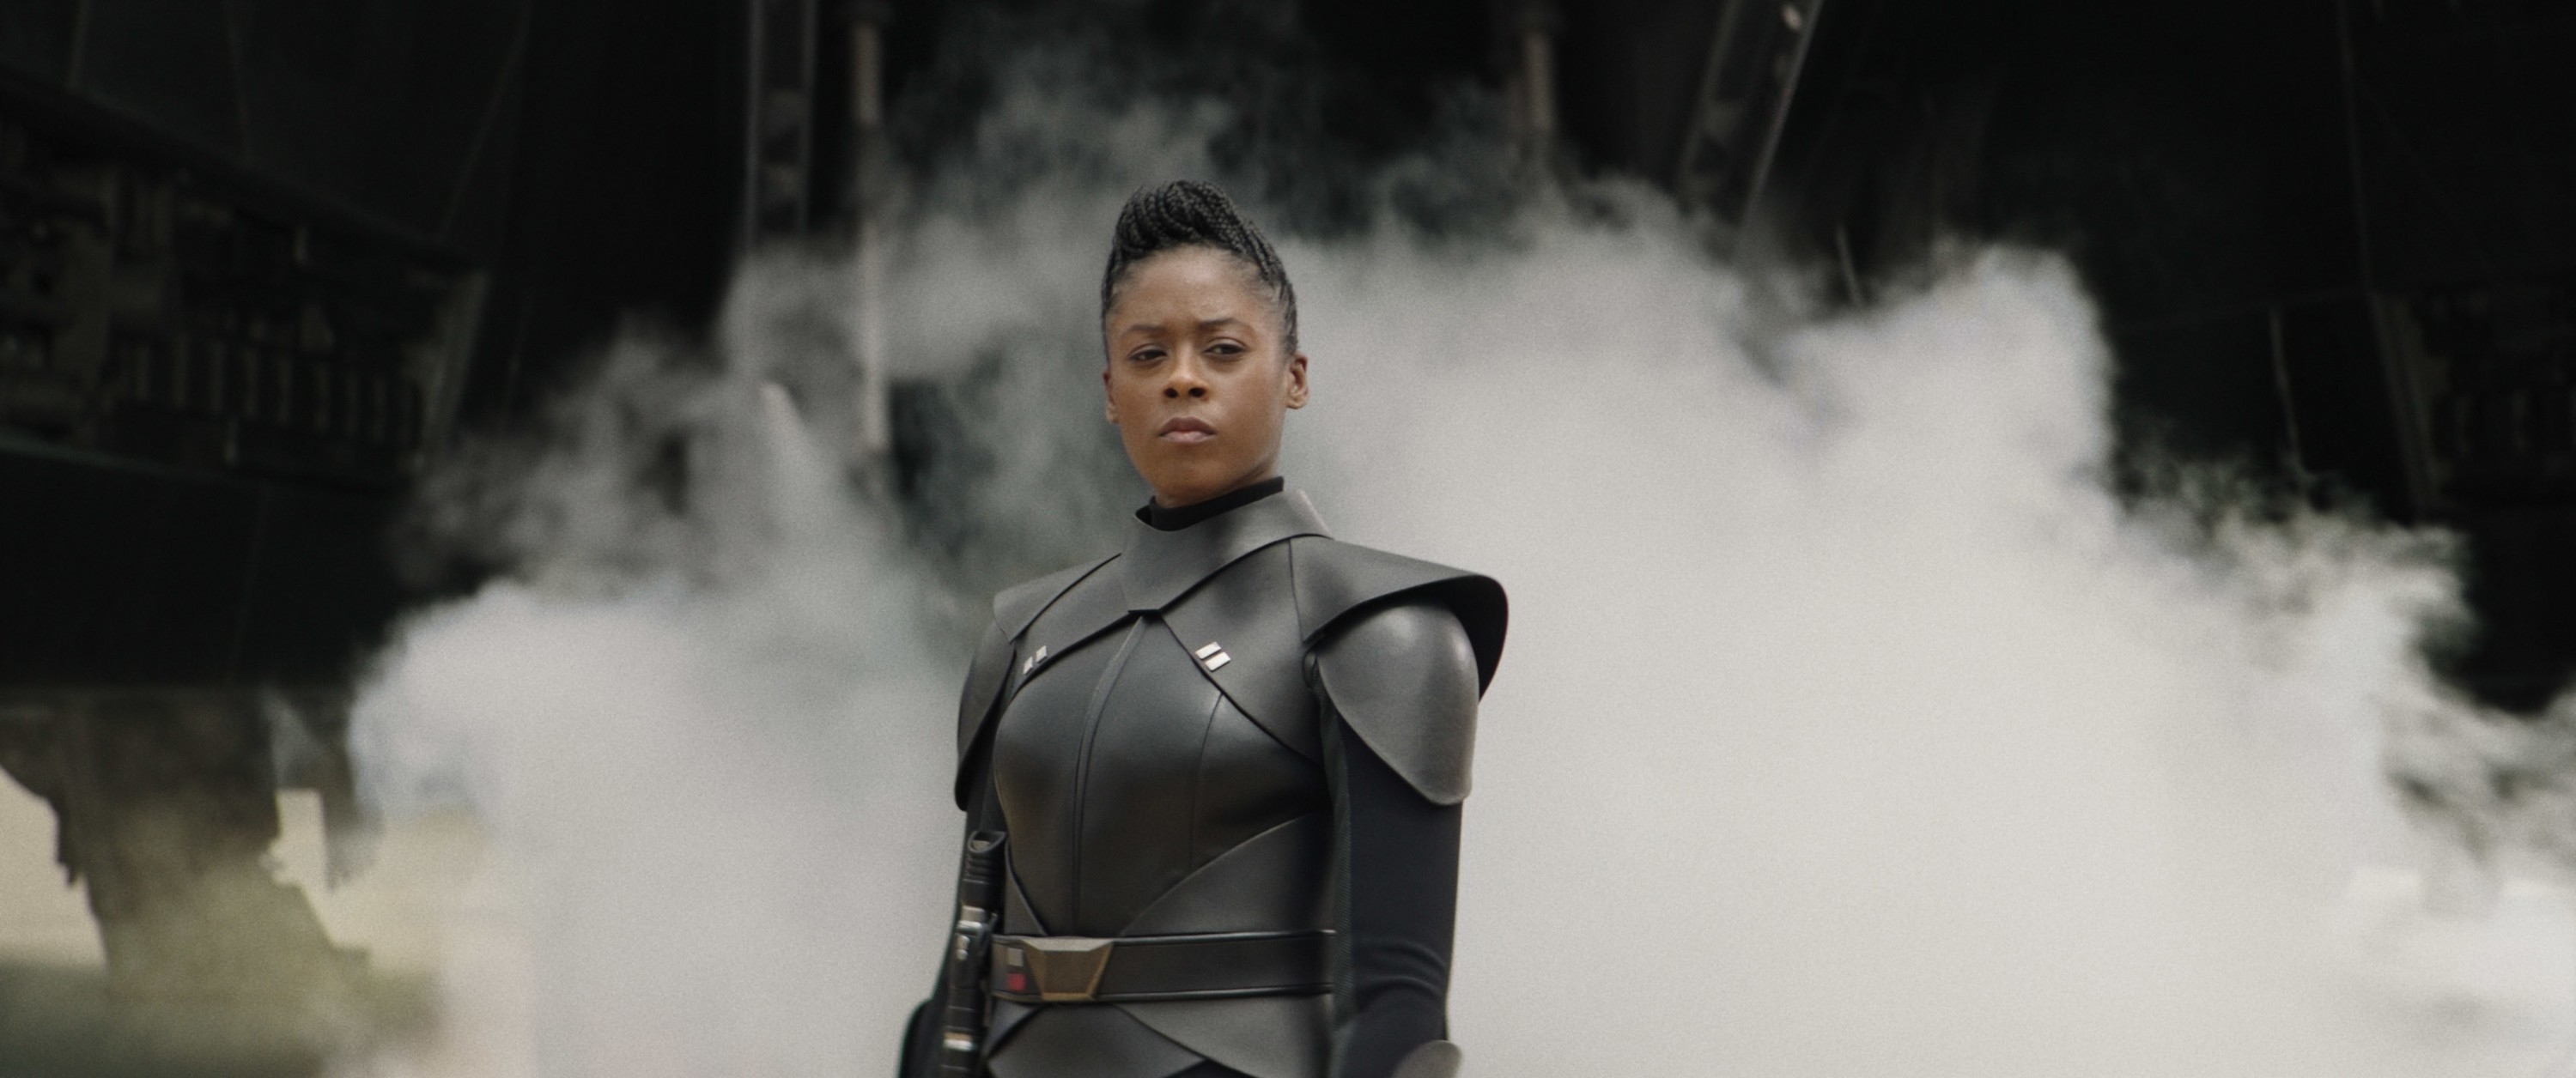 Character in a futuristic black outfit, standing confidently with a steely expression, smoke in the background